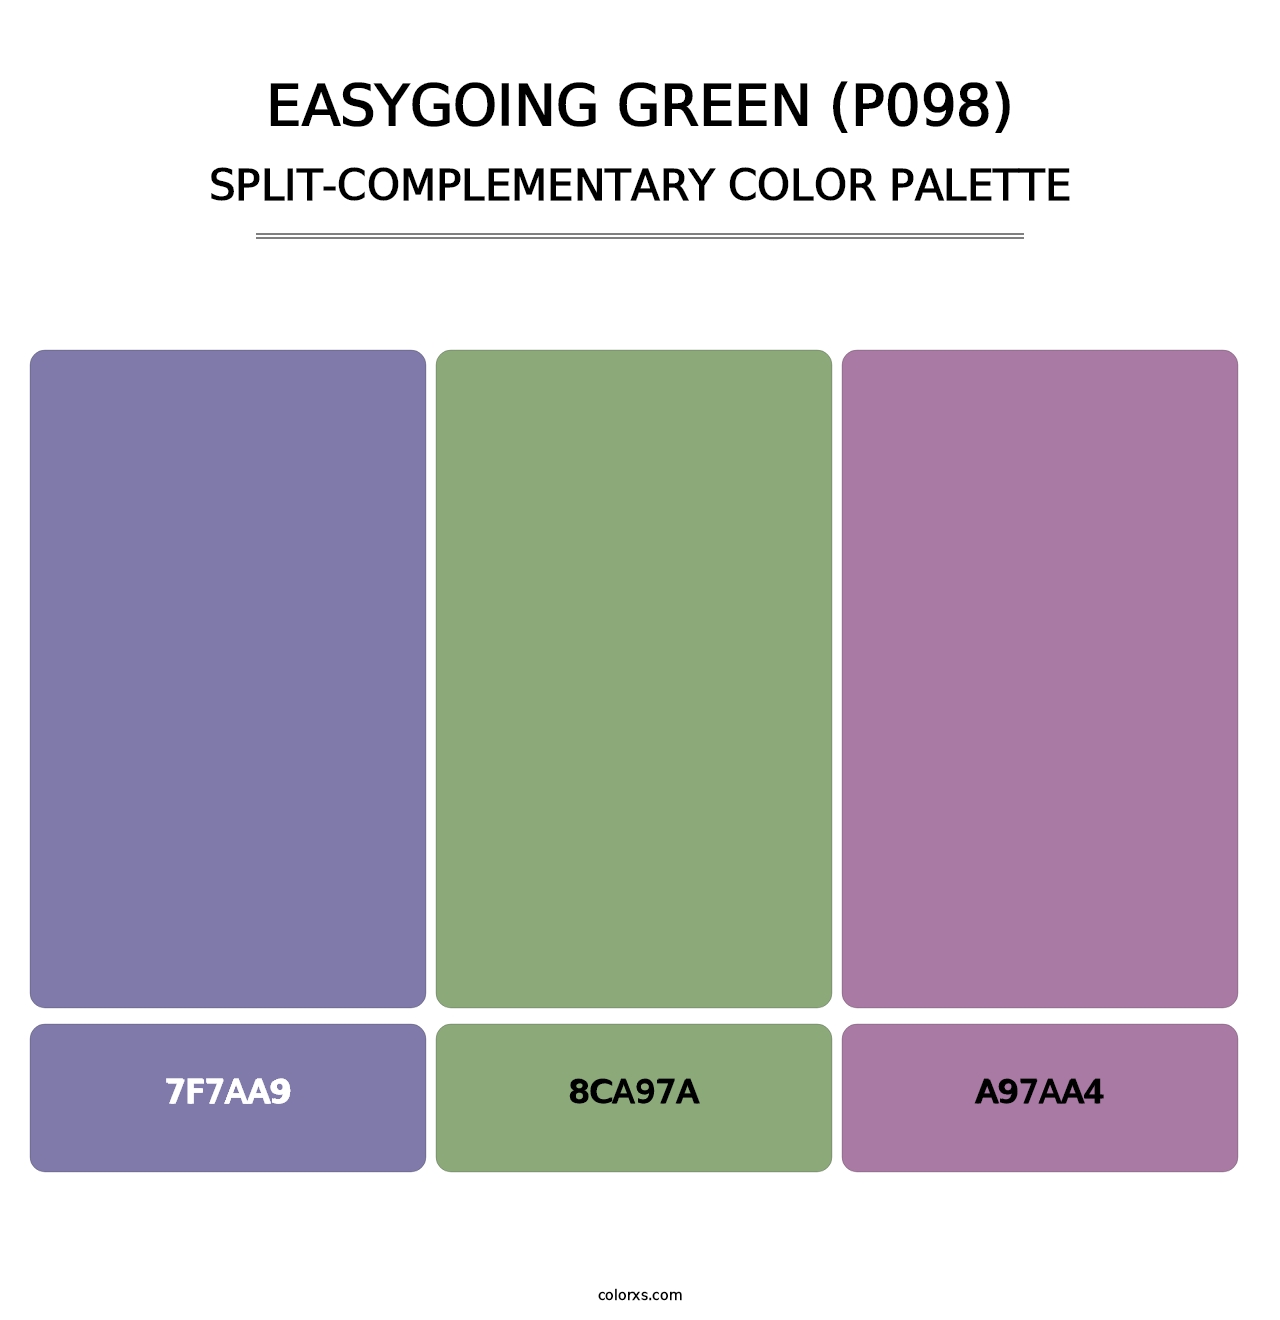 Easygoing Green (P098) - Split-Complementary Color Palette